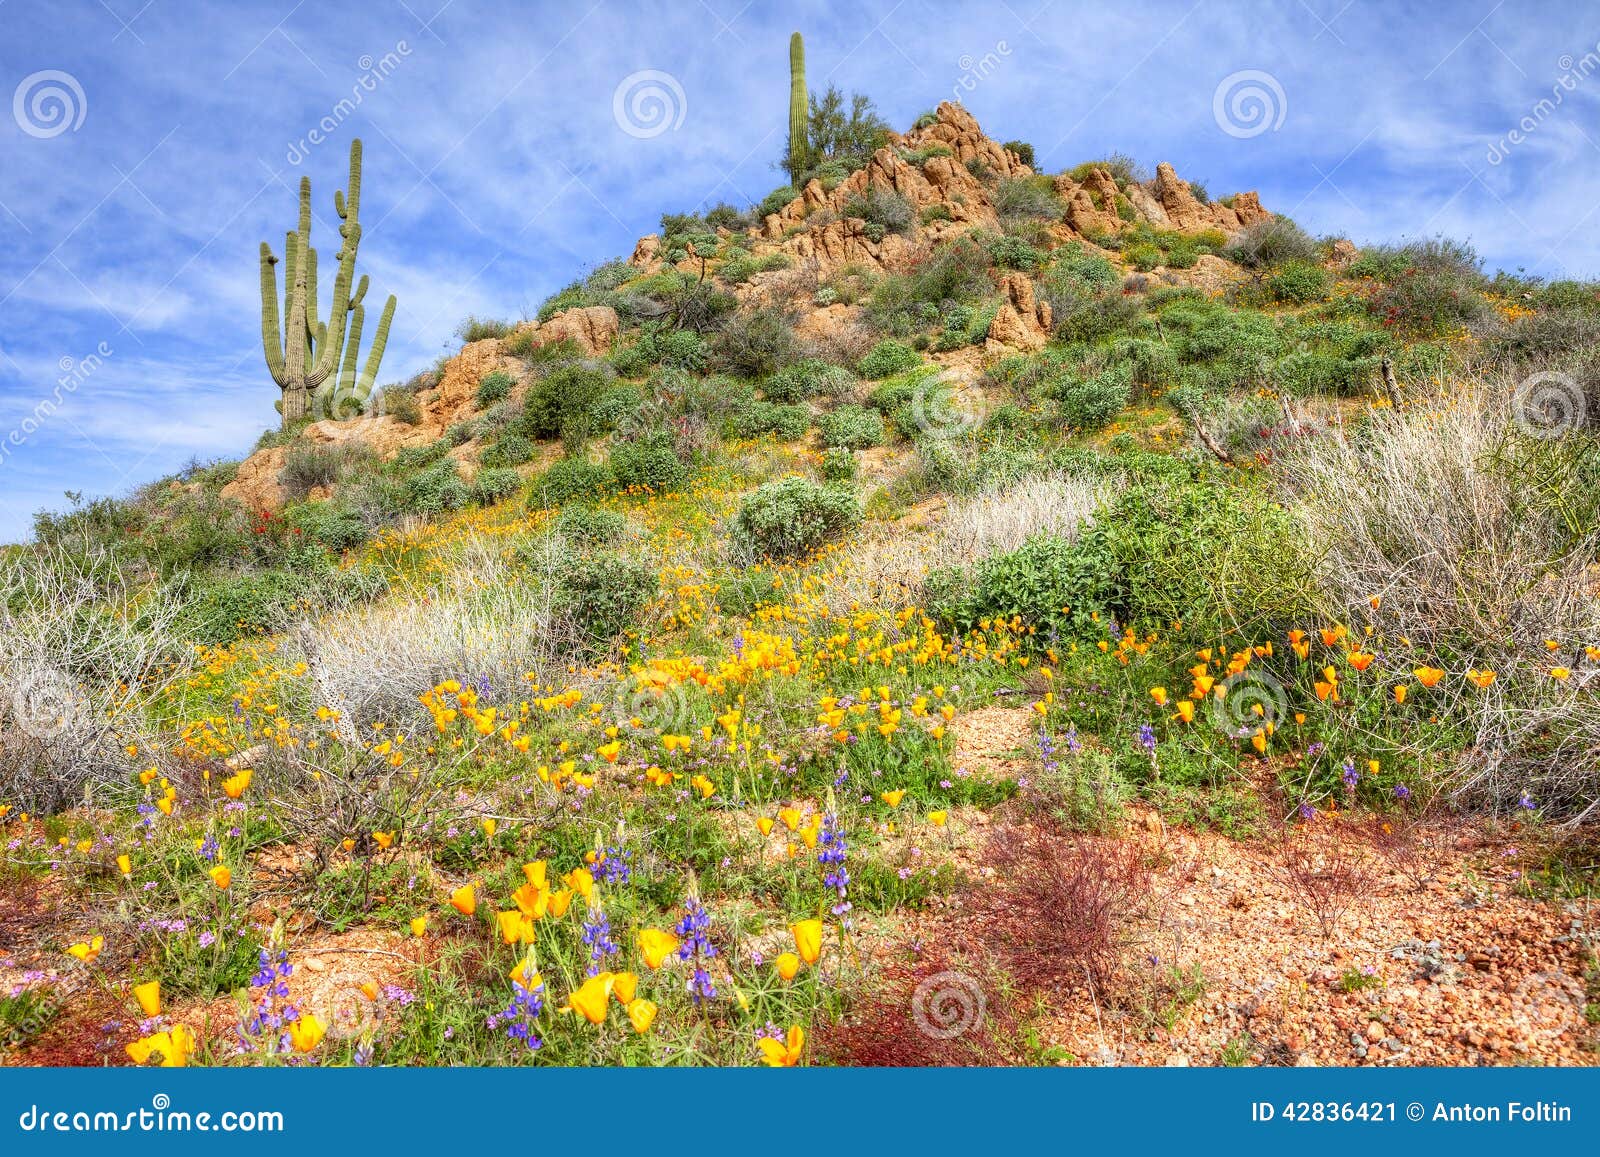 Sonoran Desert stock image. Image of mexican, tonto, gold - 42836421